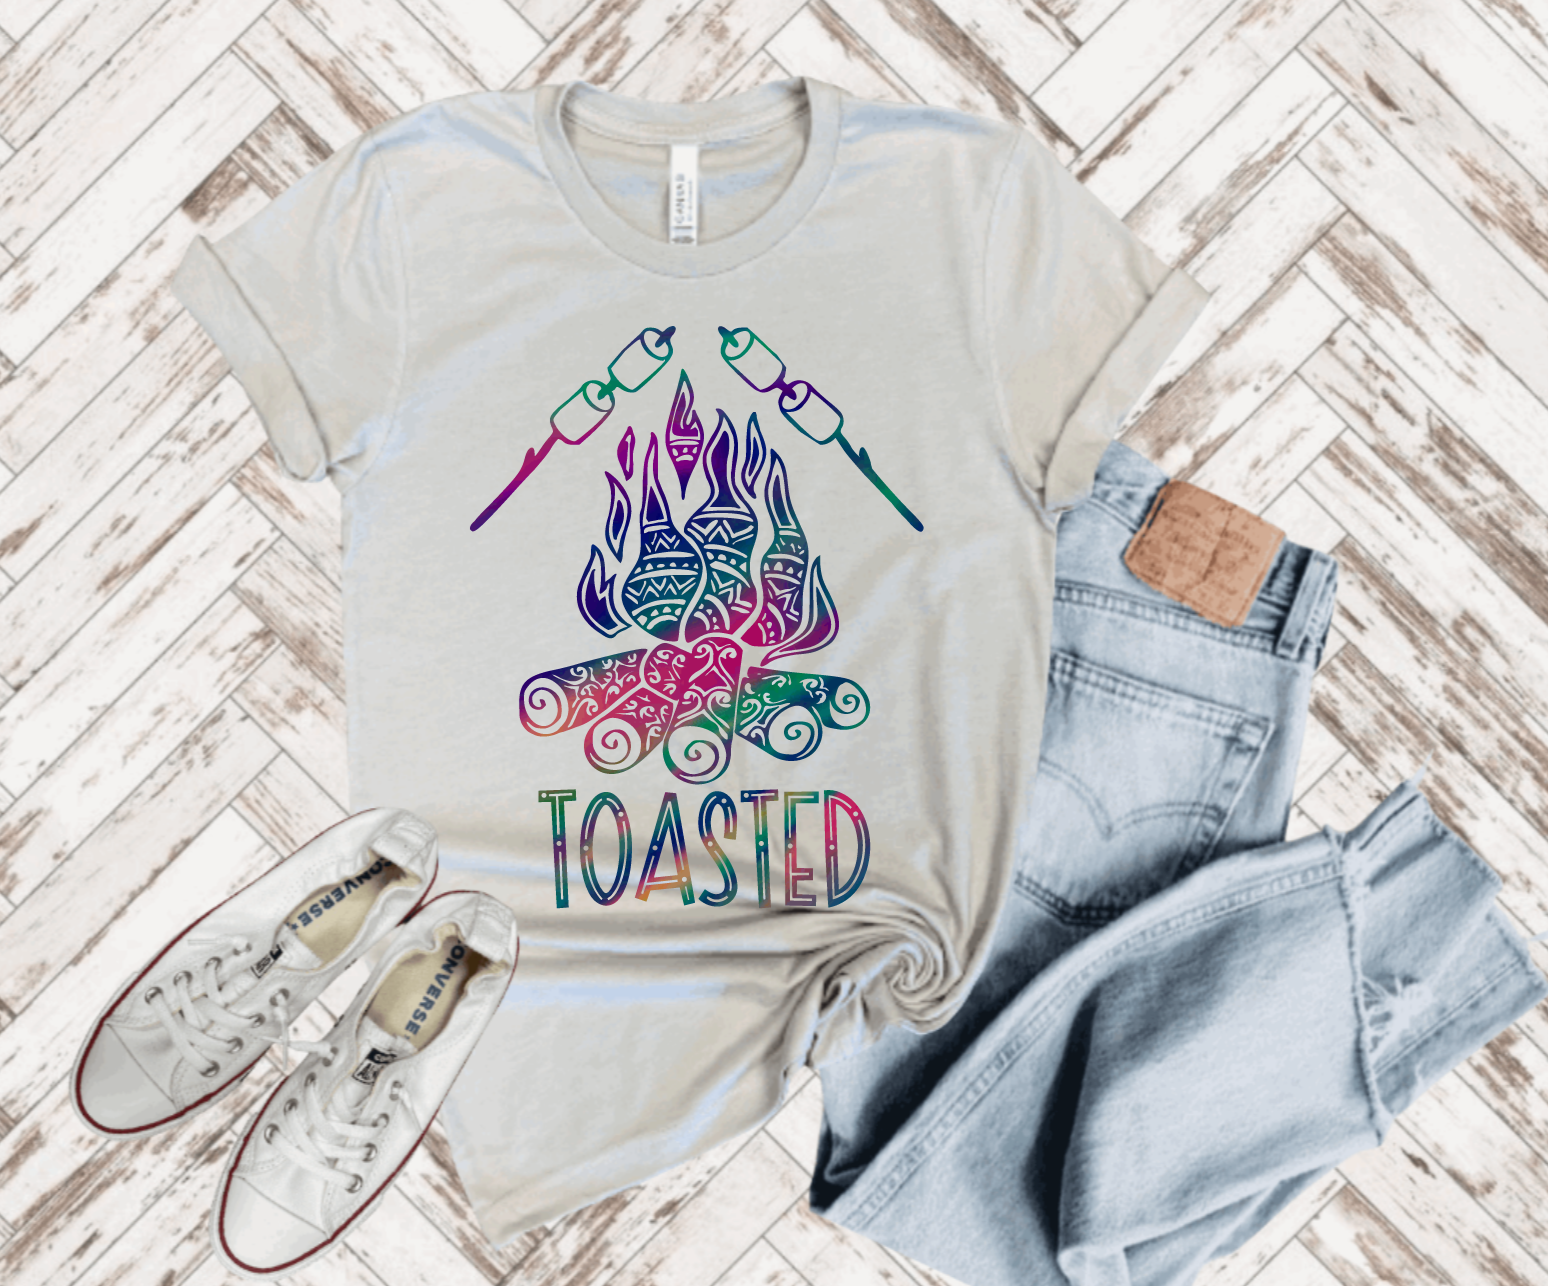 TOASTED MARSHMELLOWS CAMPING TEE